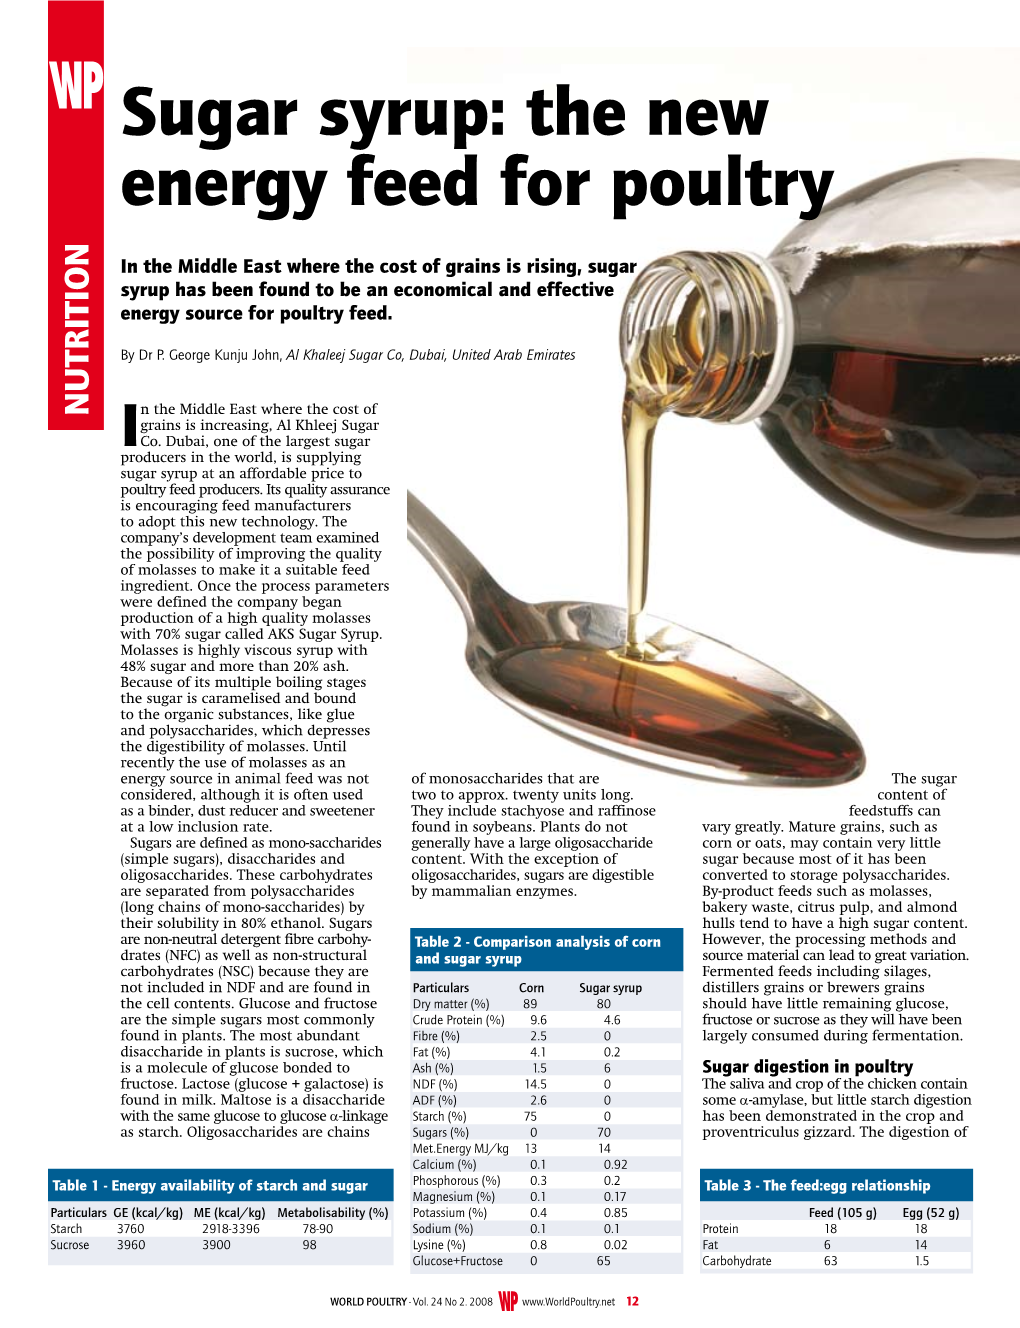 Sugar Syrup: the New Energy Feed for Poultry